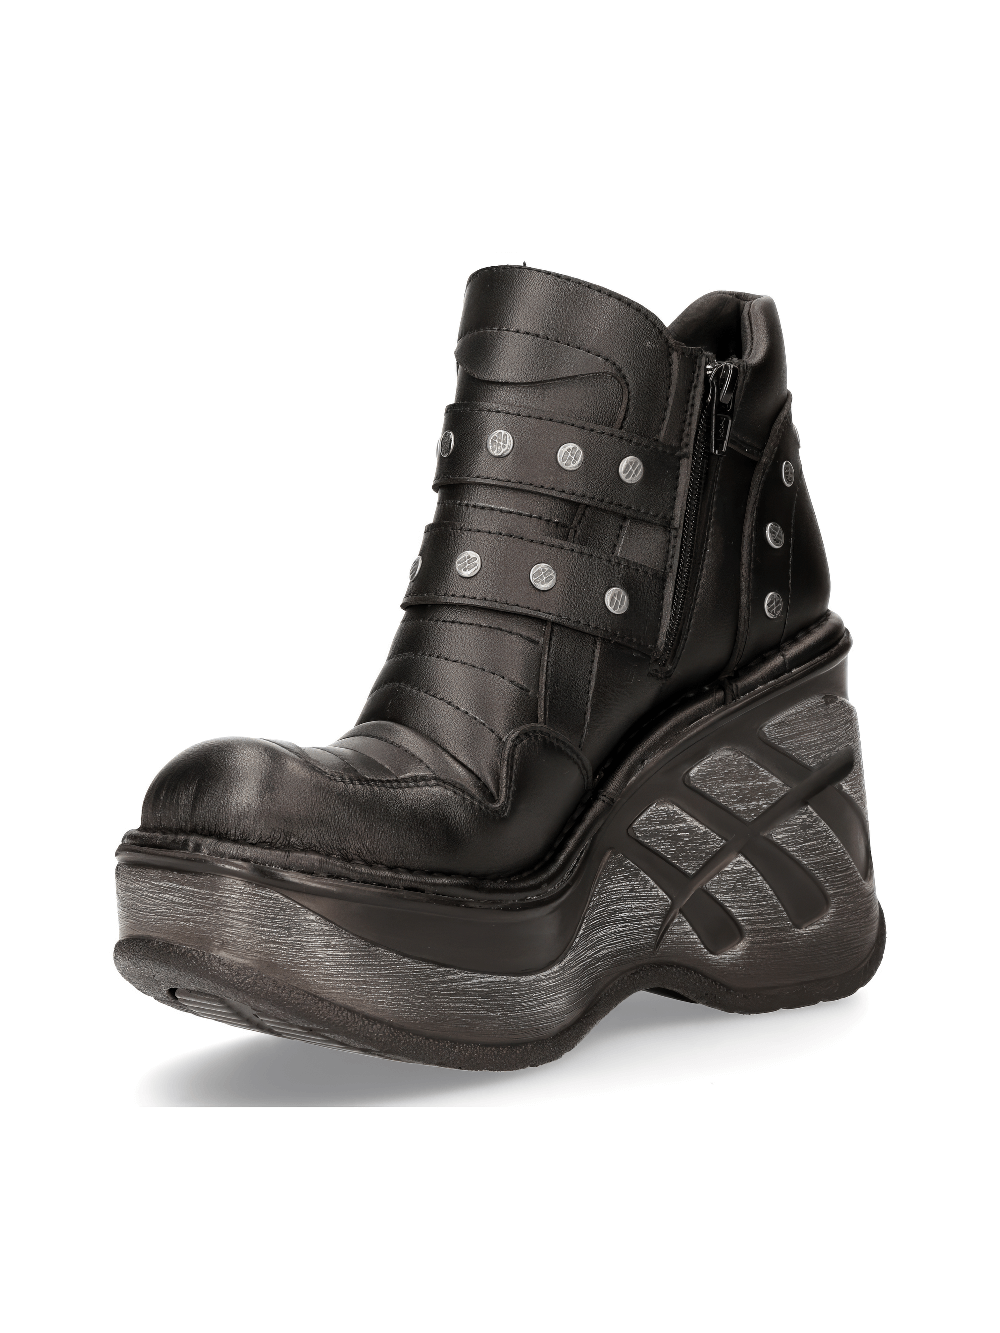 NEW ROCK Women's Gothic Style Zip-Up Black Ankle Boots